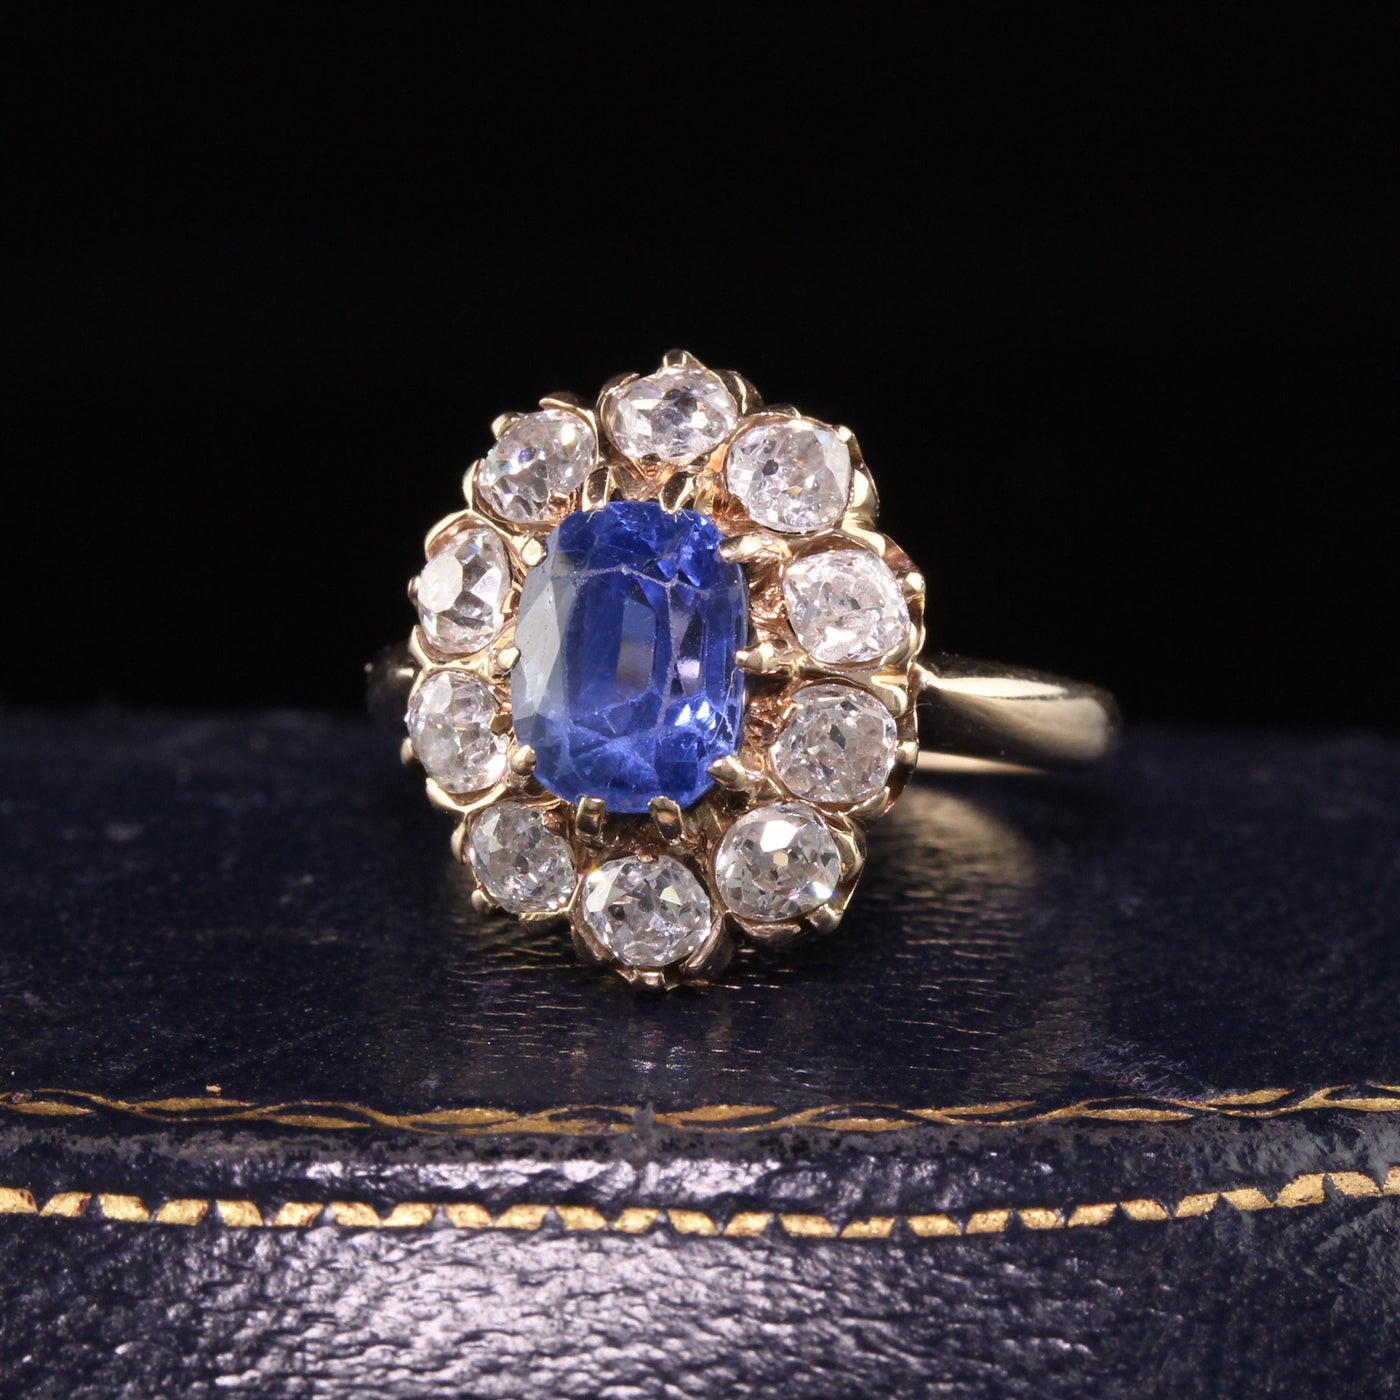 Antique Victorian 14K Yellow Gold Old Mine Diamond and Sapphire Engagement Ring